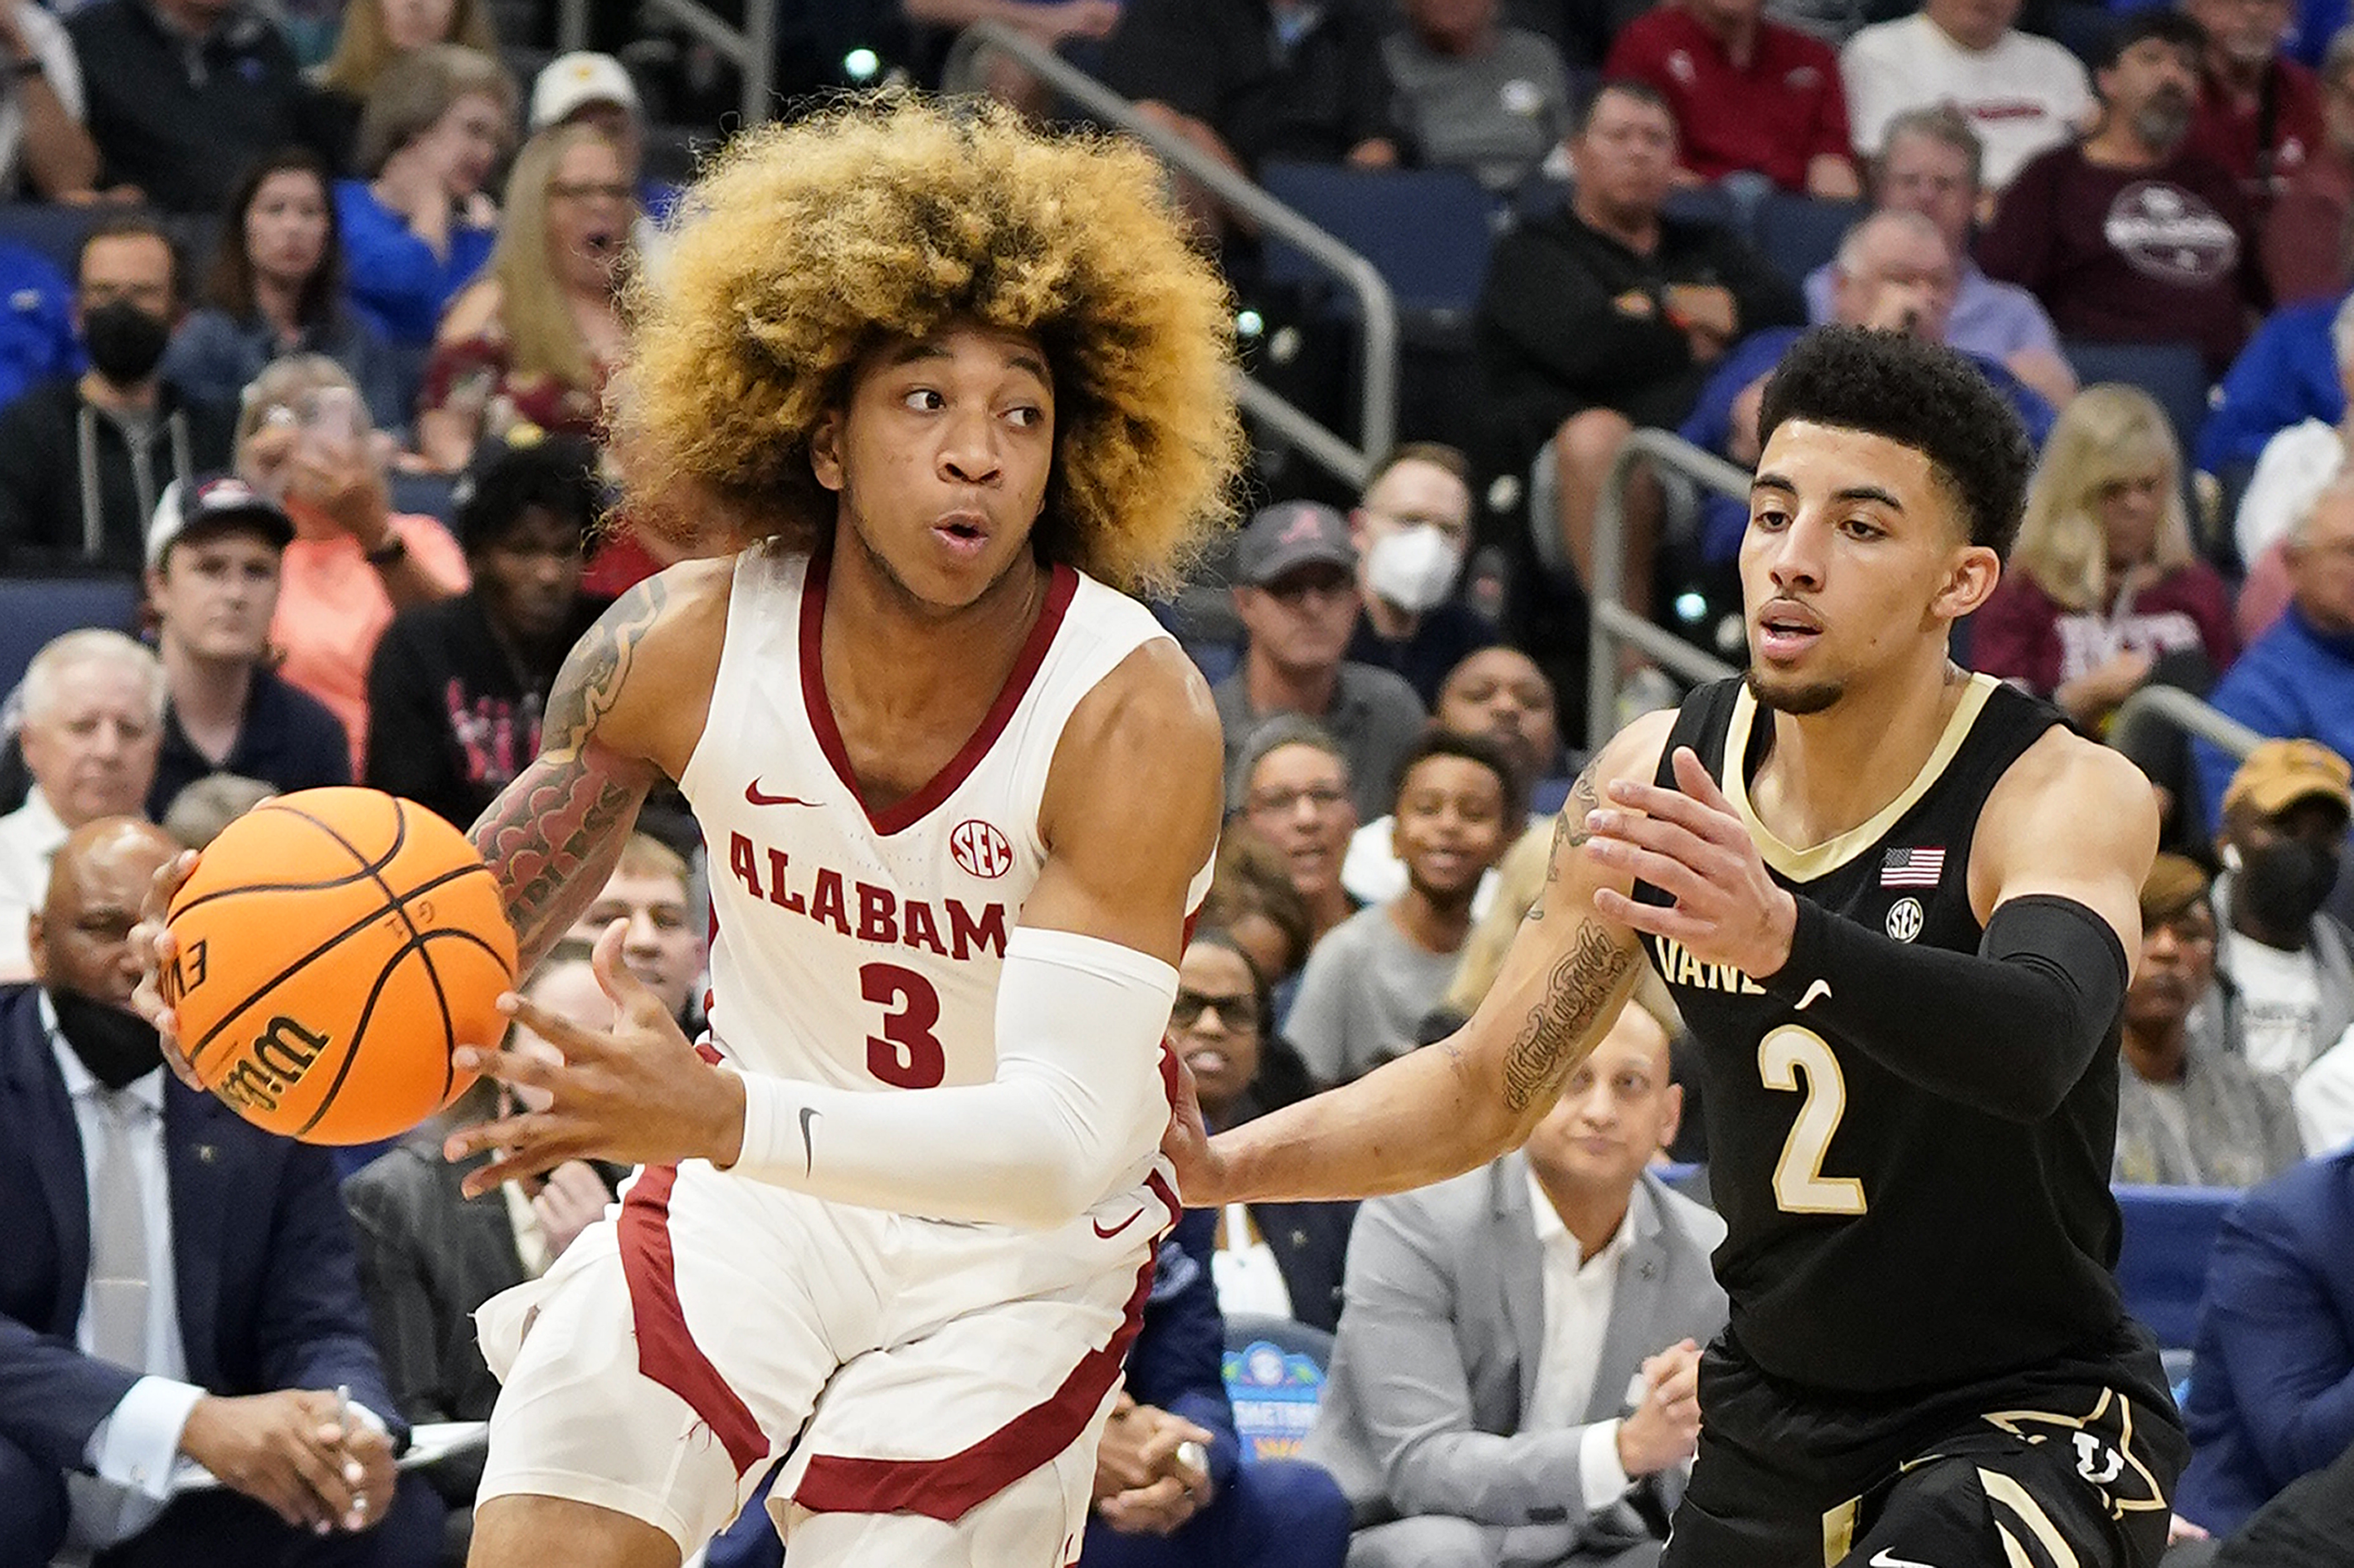 Alabama-Notre Dame live stream (3/18) How to watch NCAA tournament online, TV, time